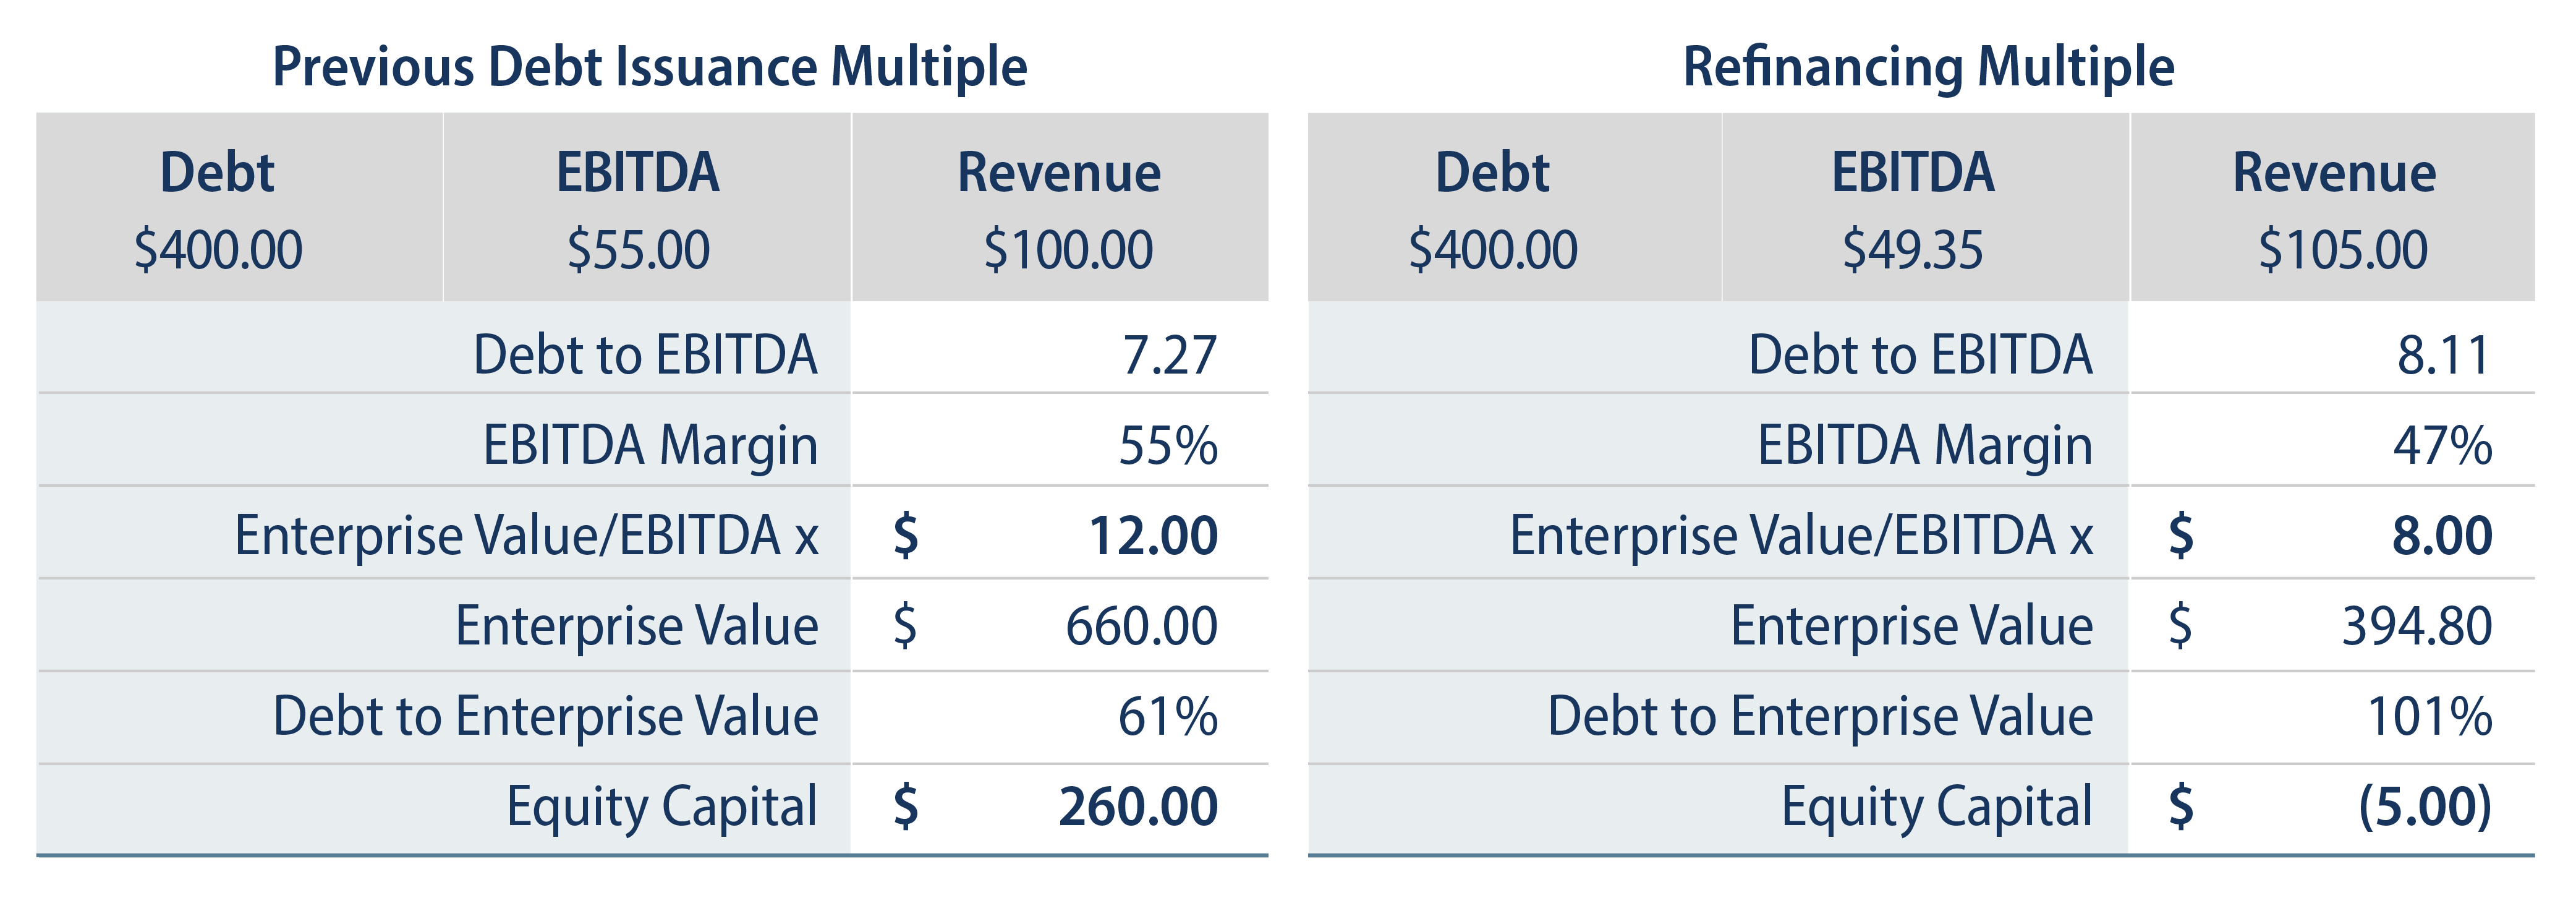 Hypothetical Impact of Lower Asset Multiples, with Modest Revenue Growth and Declining Margins